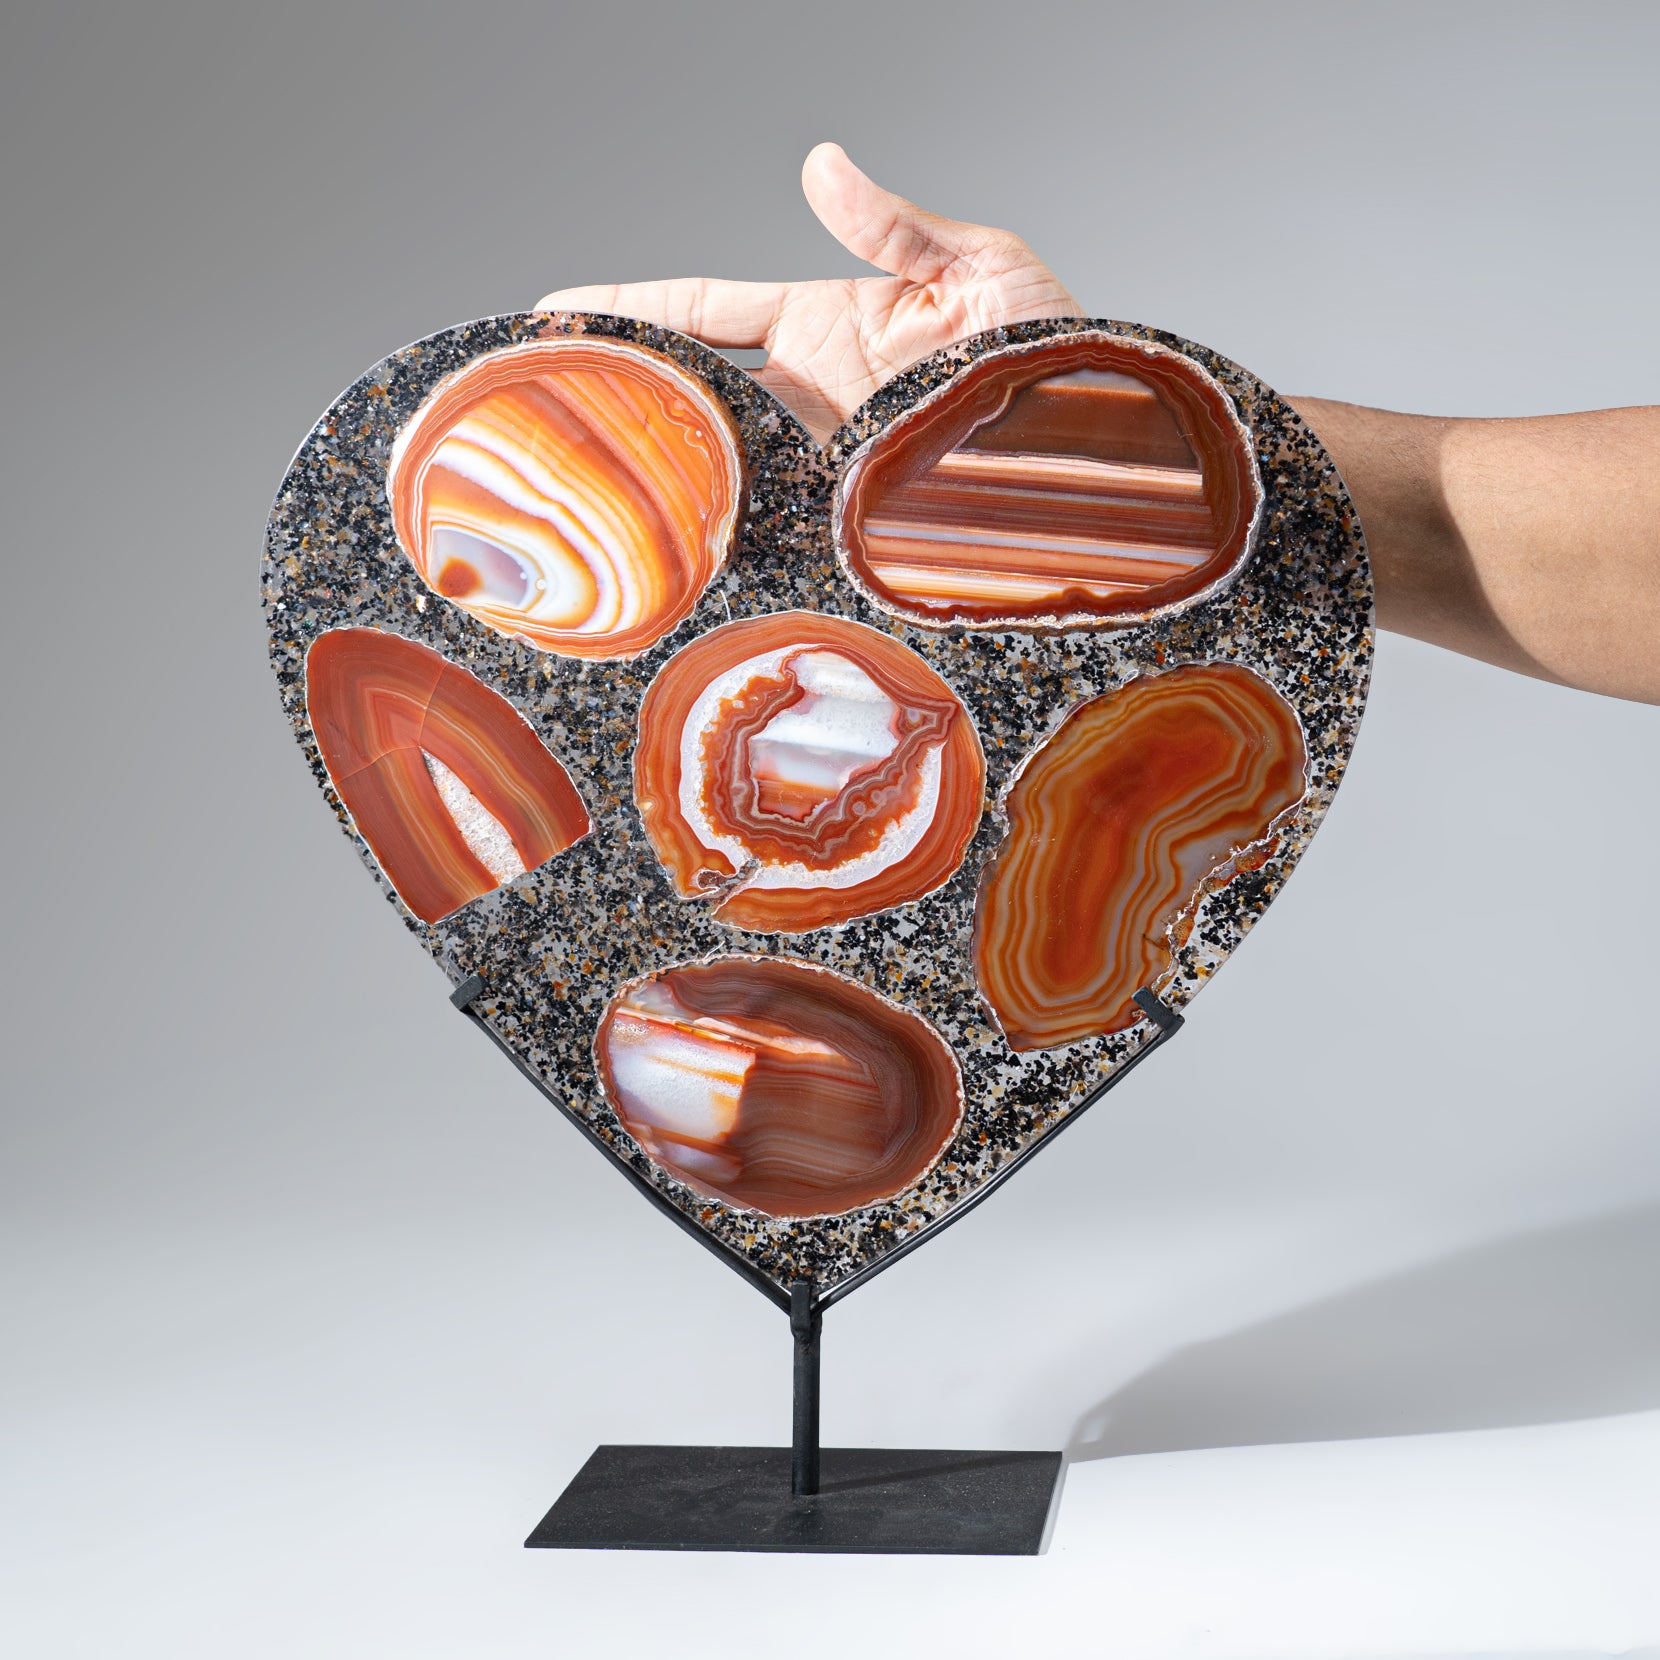 Large Polished Carnelian Agate Heart on Metal Stand (3.5 lbs) AGHS13